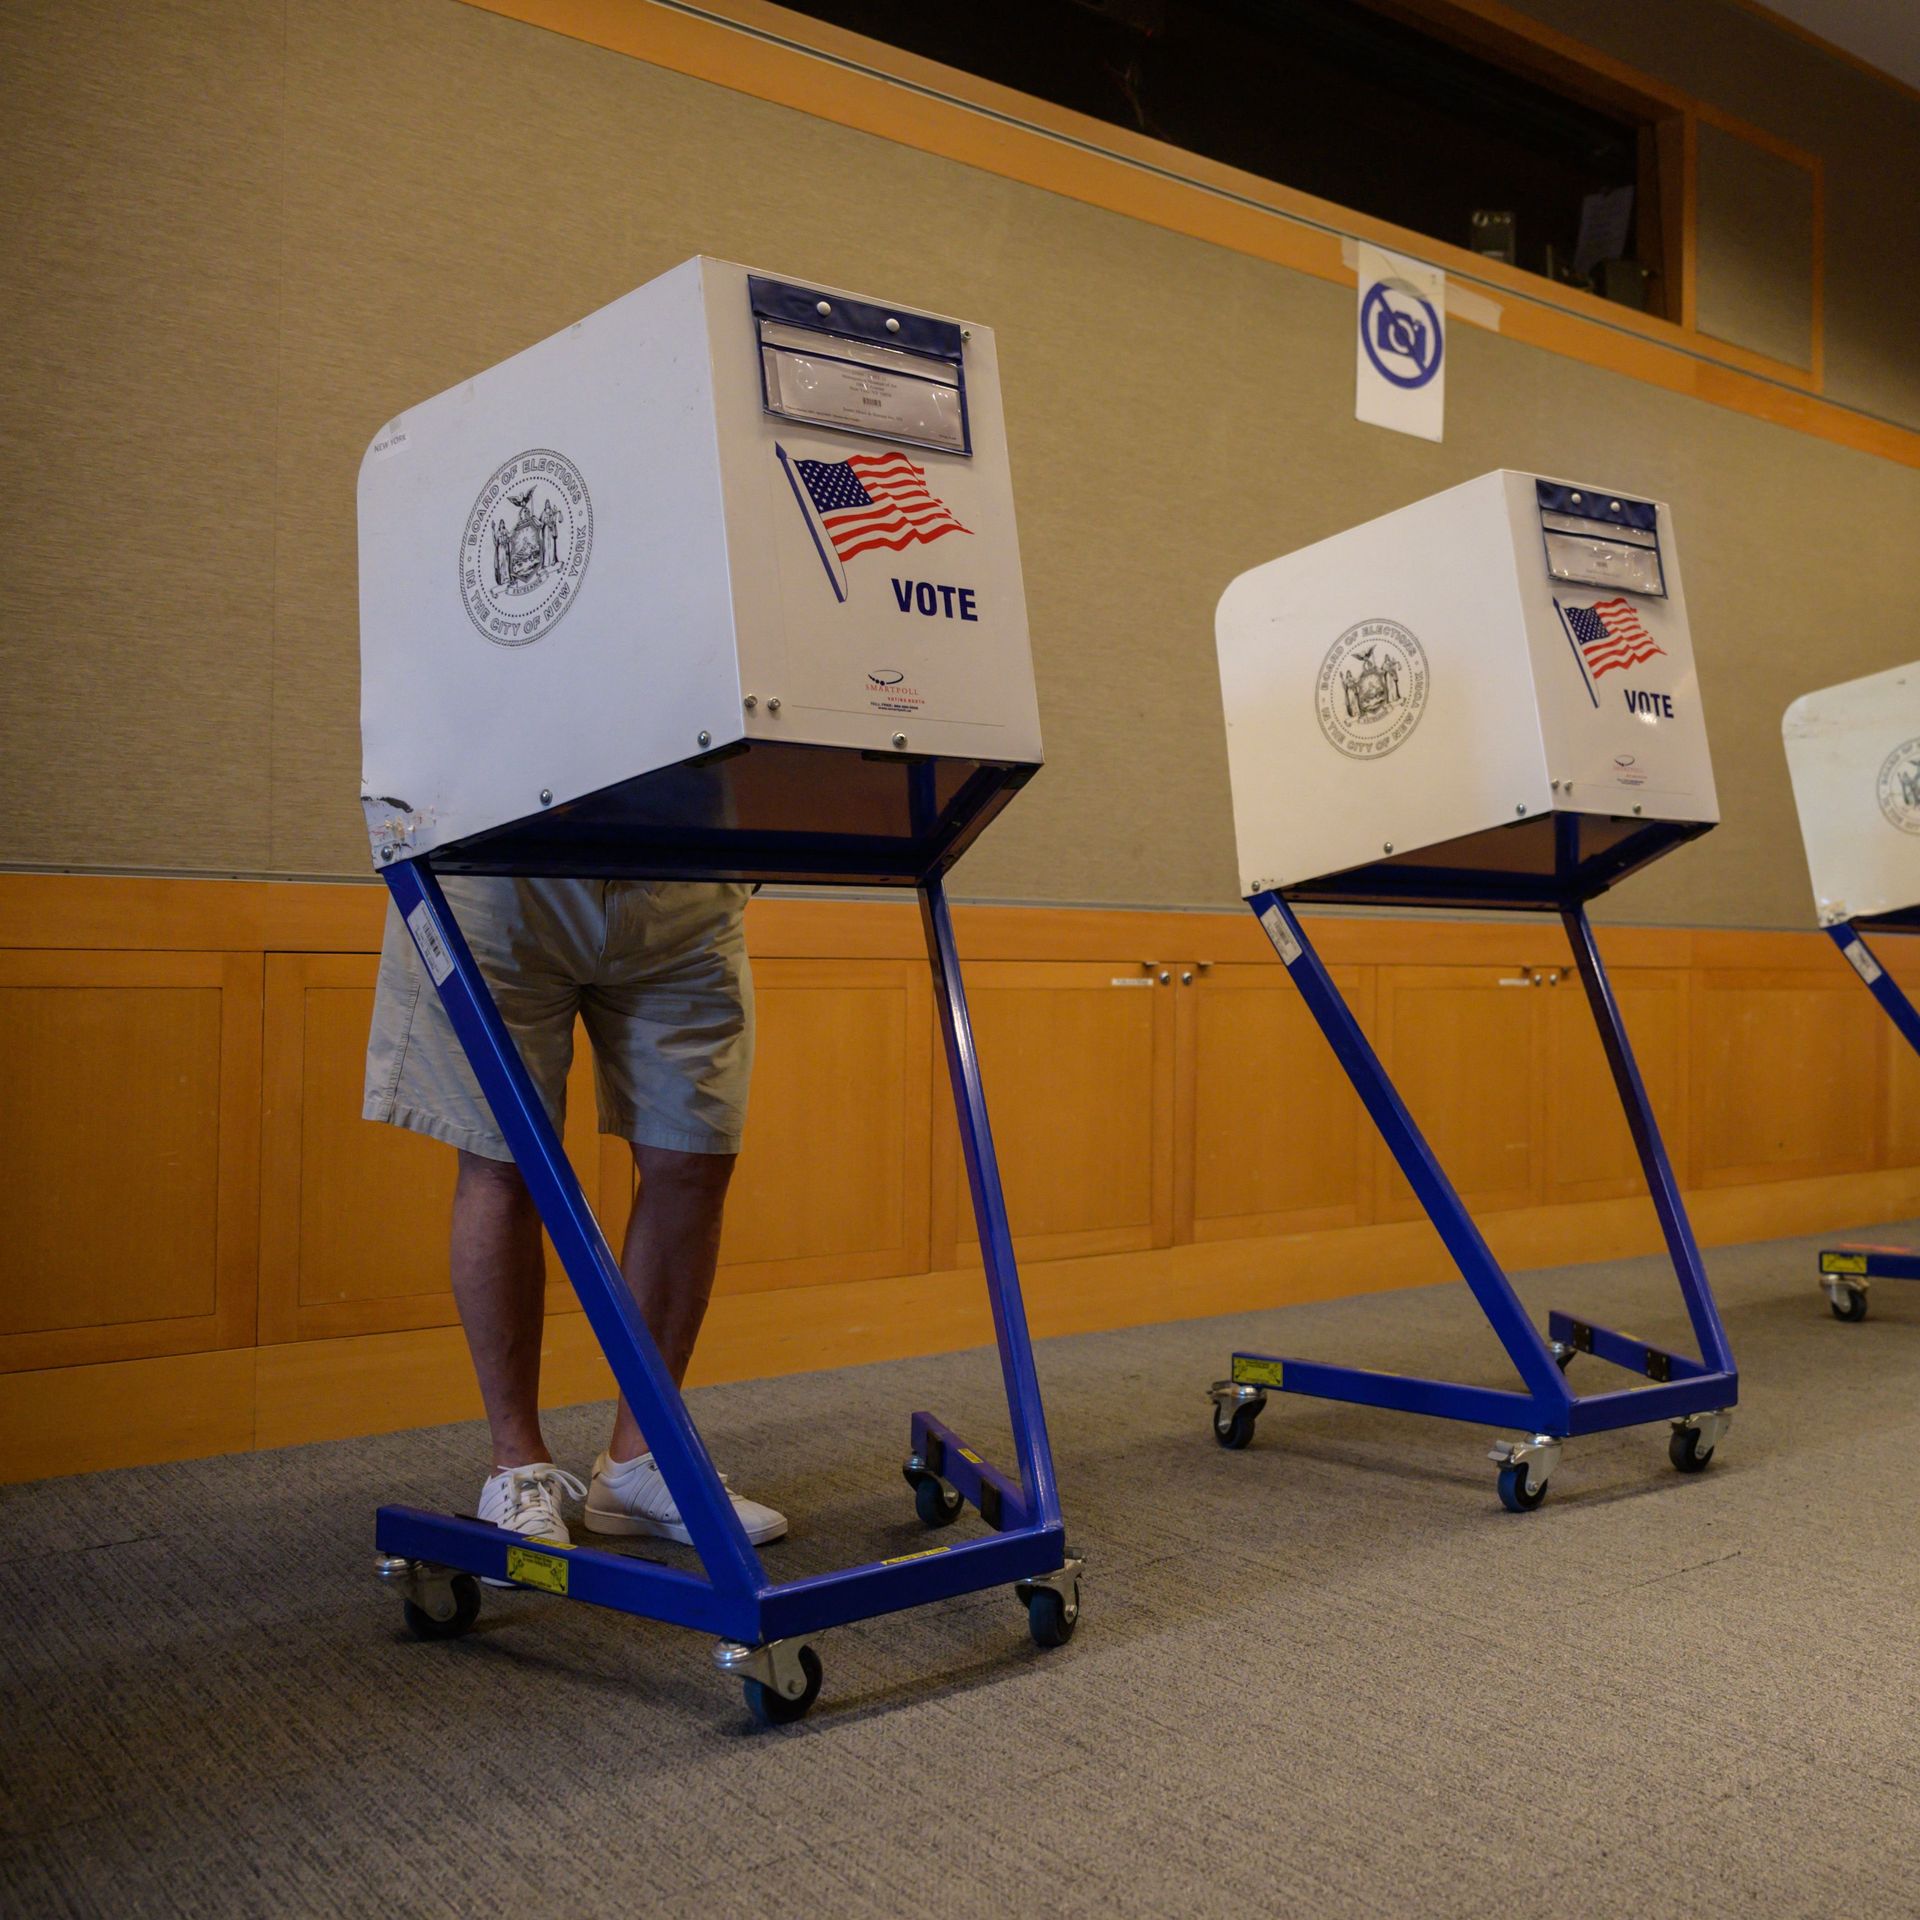 A photo of voting booths.